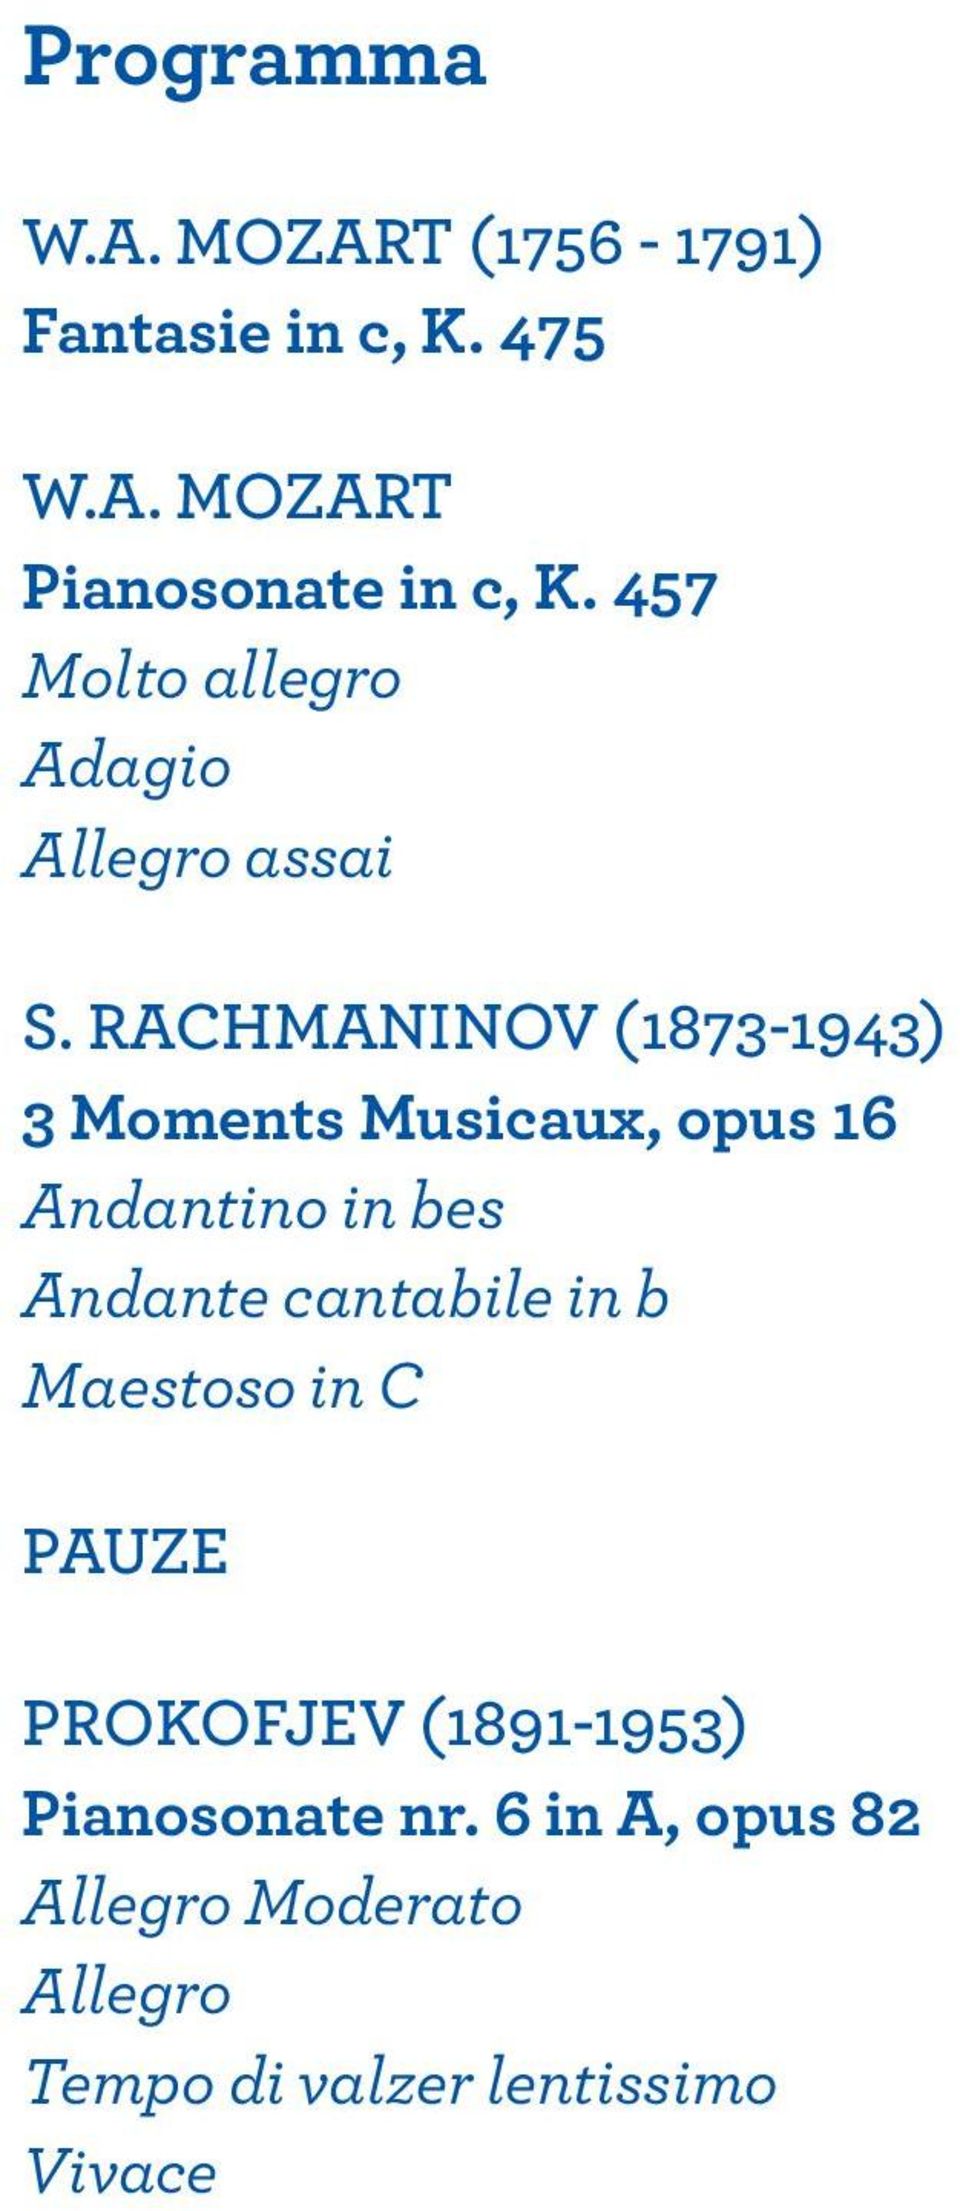 RACHMANINOV (1873-1943) 3 Moments Musicaux, opus 16 Andantino in bes Andante cantabile